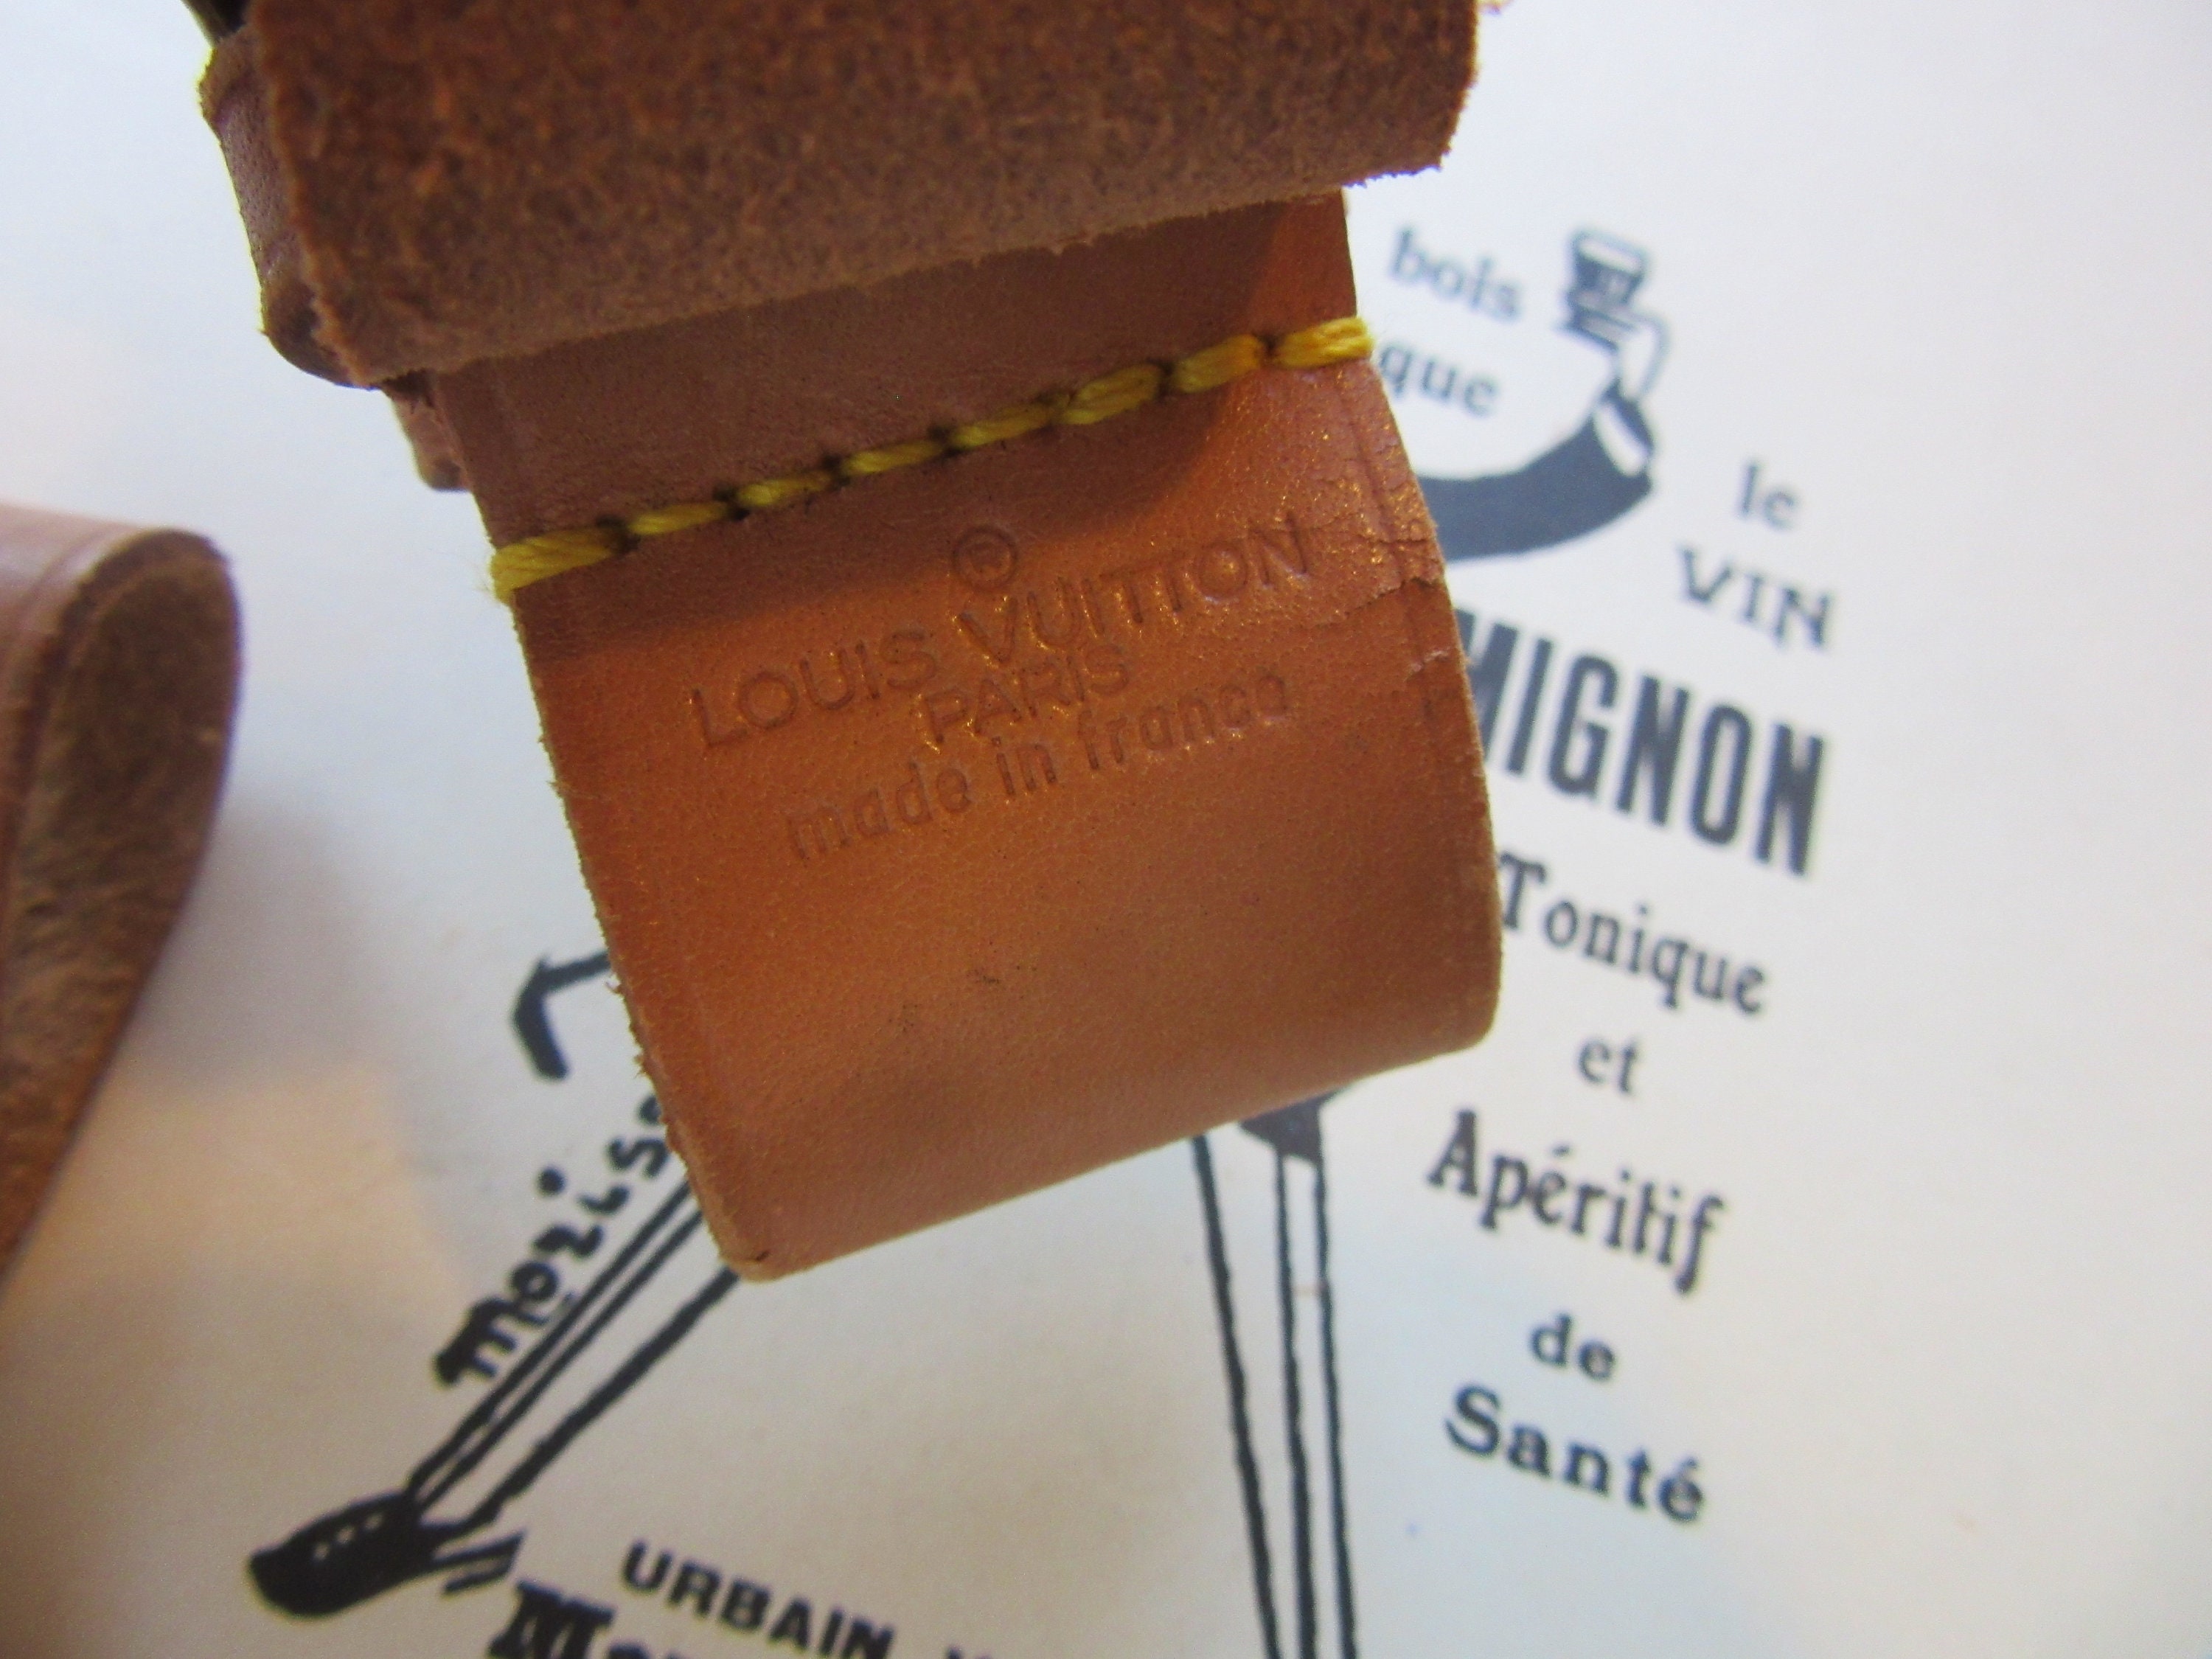 LV (choice Neuf ) Louis Vuitton Luggage Tag Vintage Leather Made in France  - Vintage - Once Loved - Vintage Wear From Use - Lovely Louis!